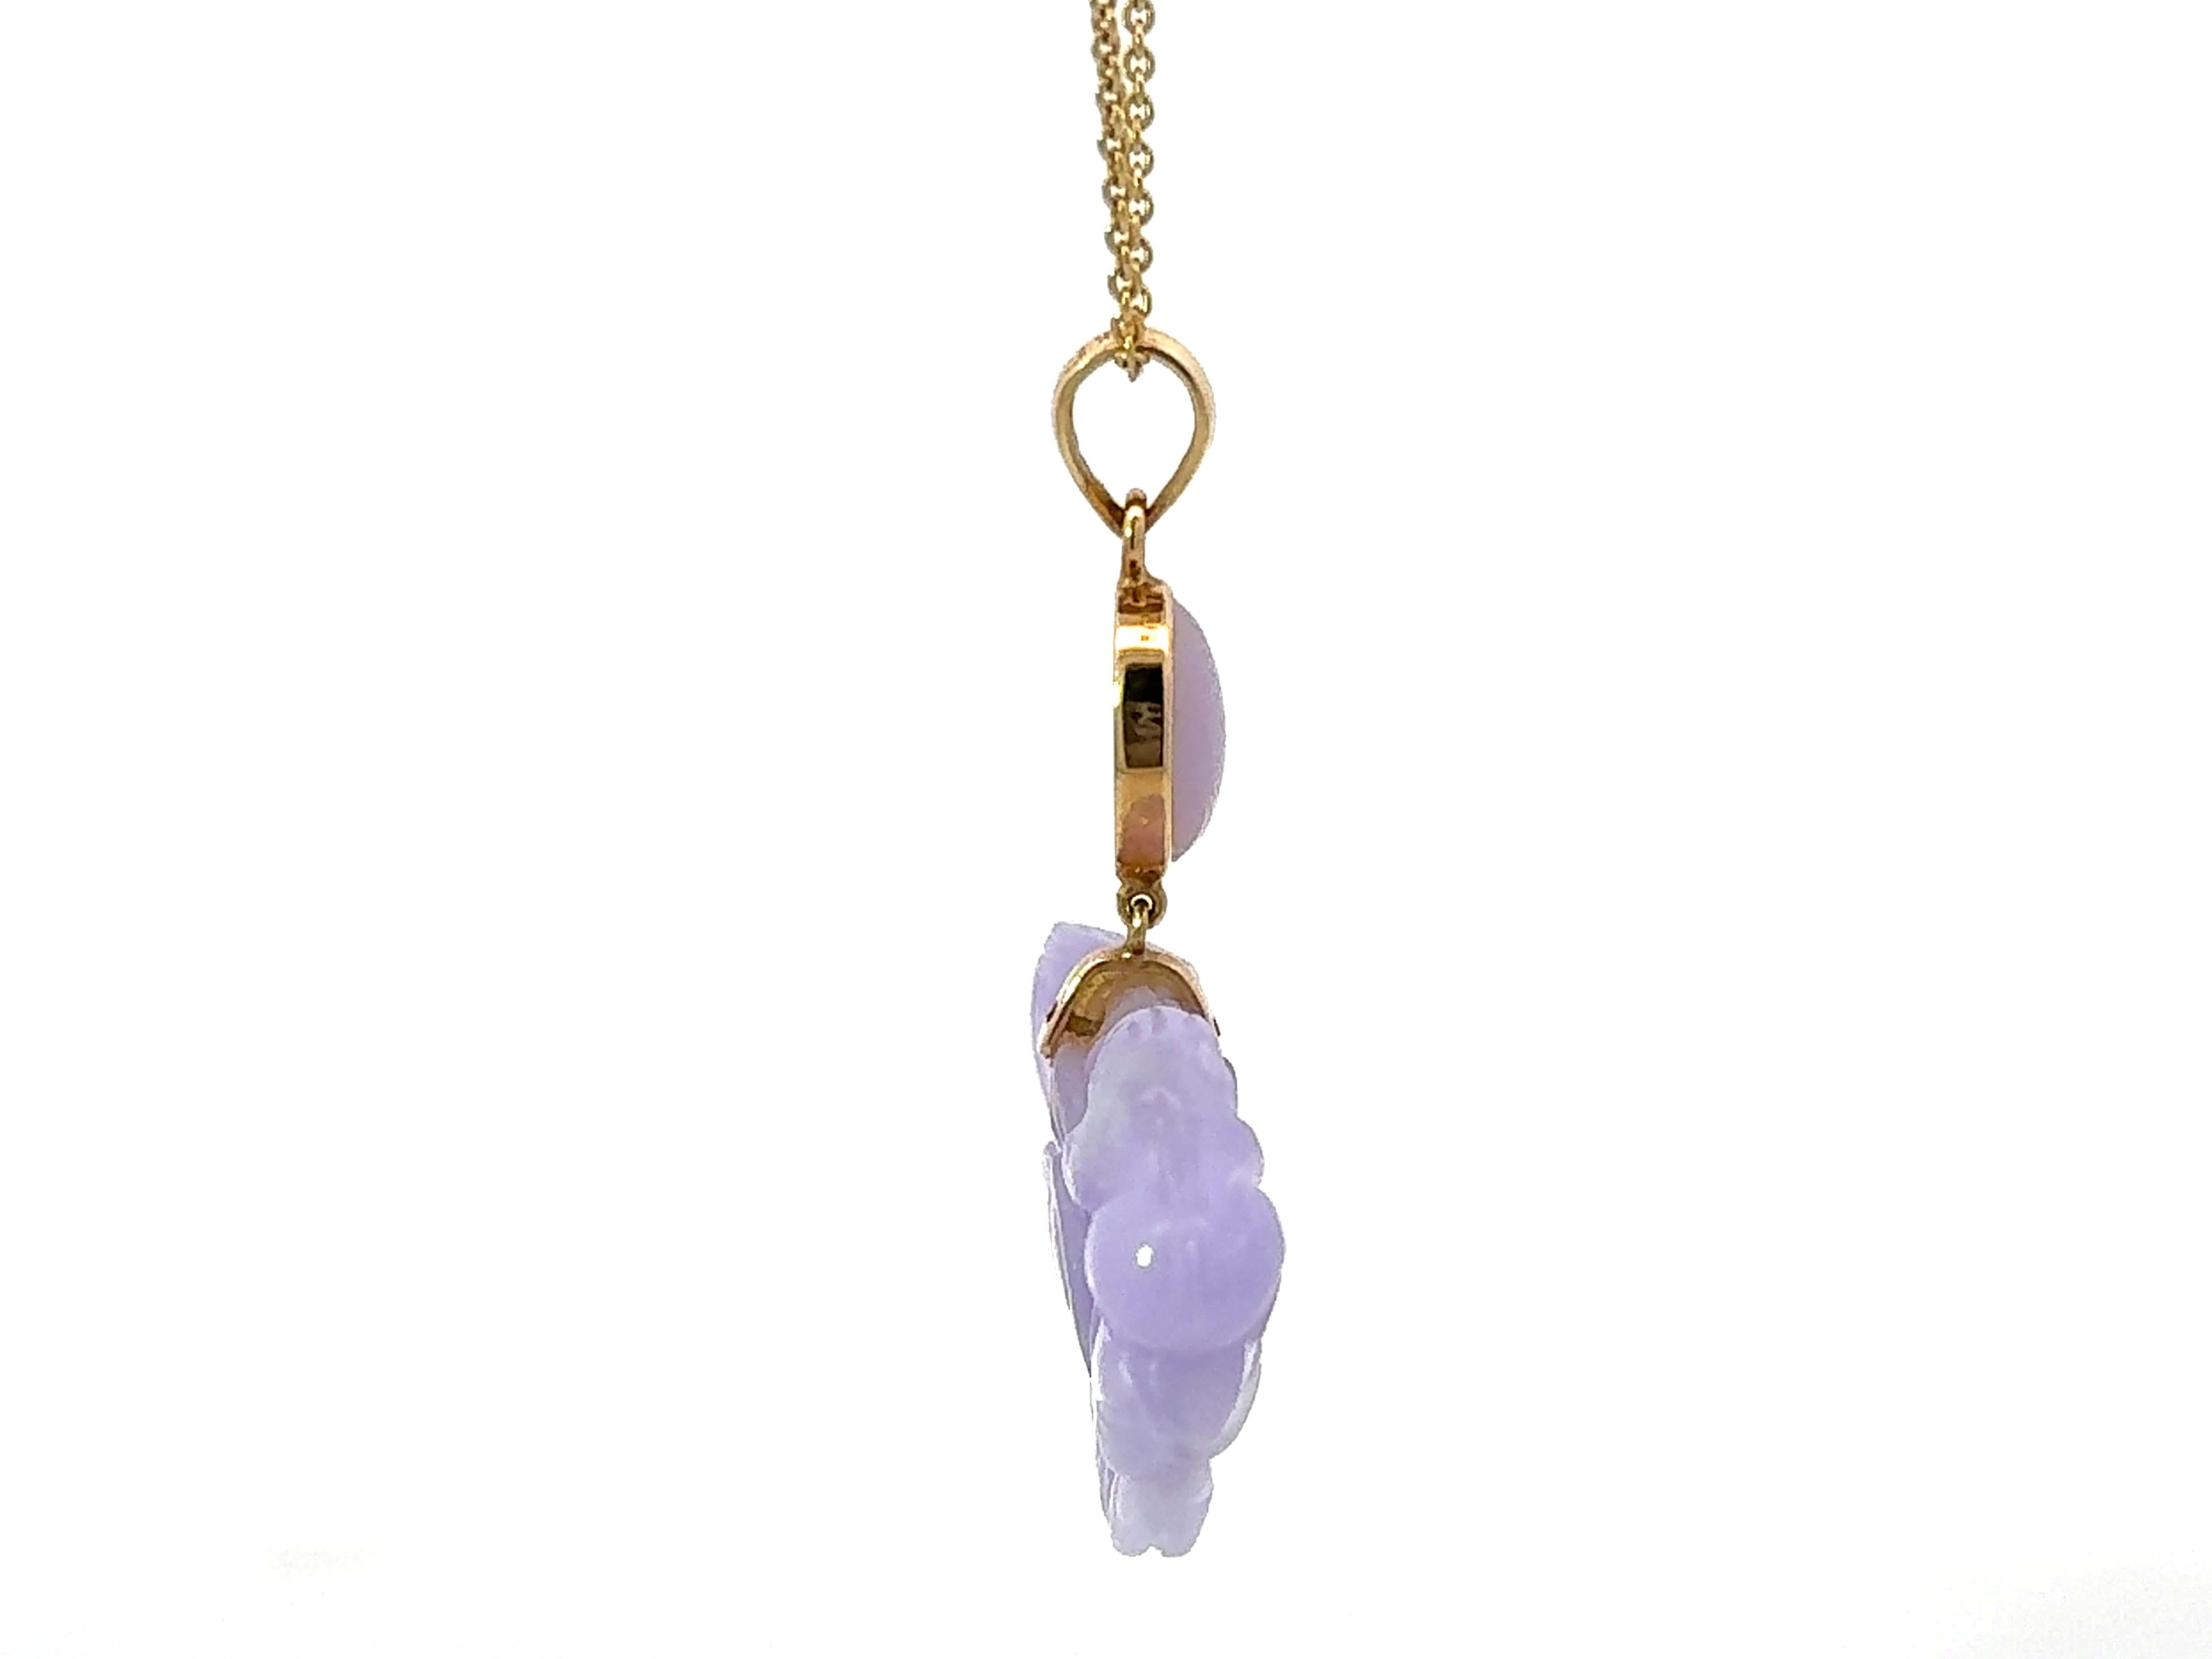 Lavender Jade Lotus Frog Necklace 14K Yellow Gold In Excellent Condition For Sale In Honolulu, HI